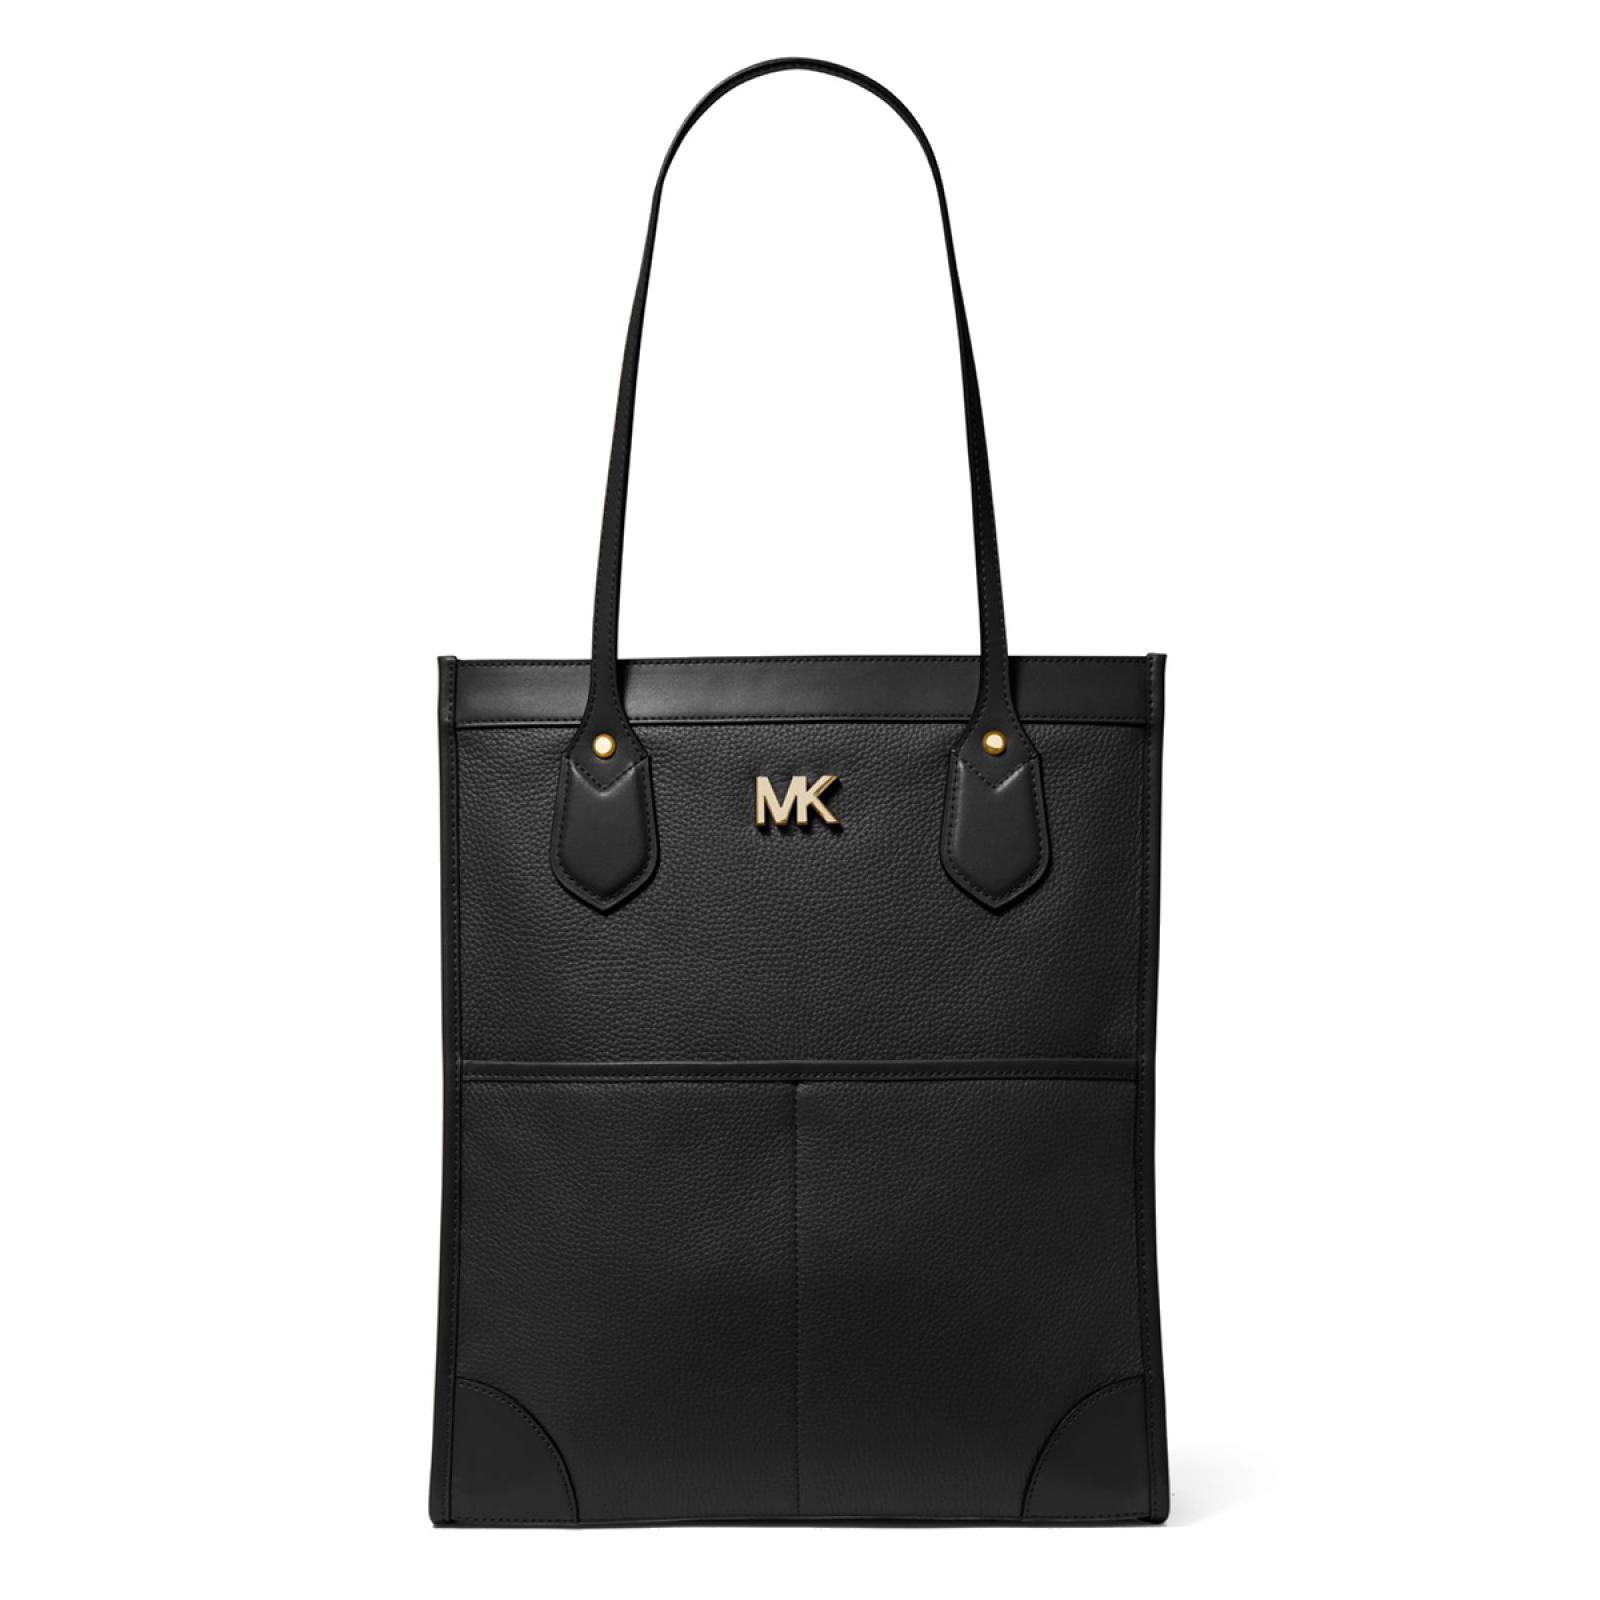 Michael Kors Large Bay Tote Bag in pebbled leather - 1